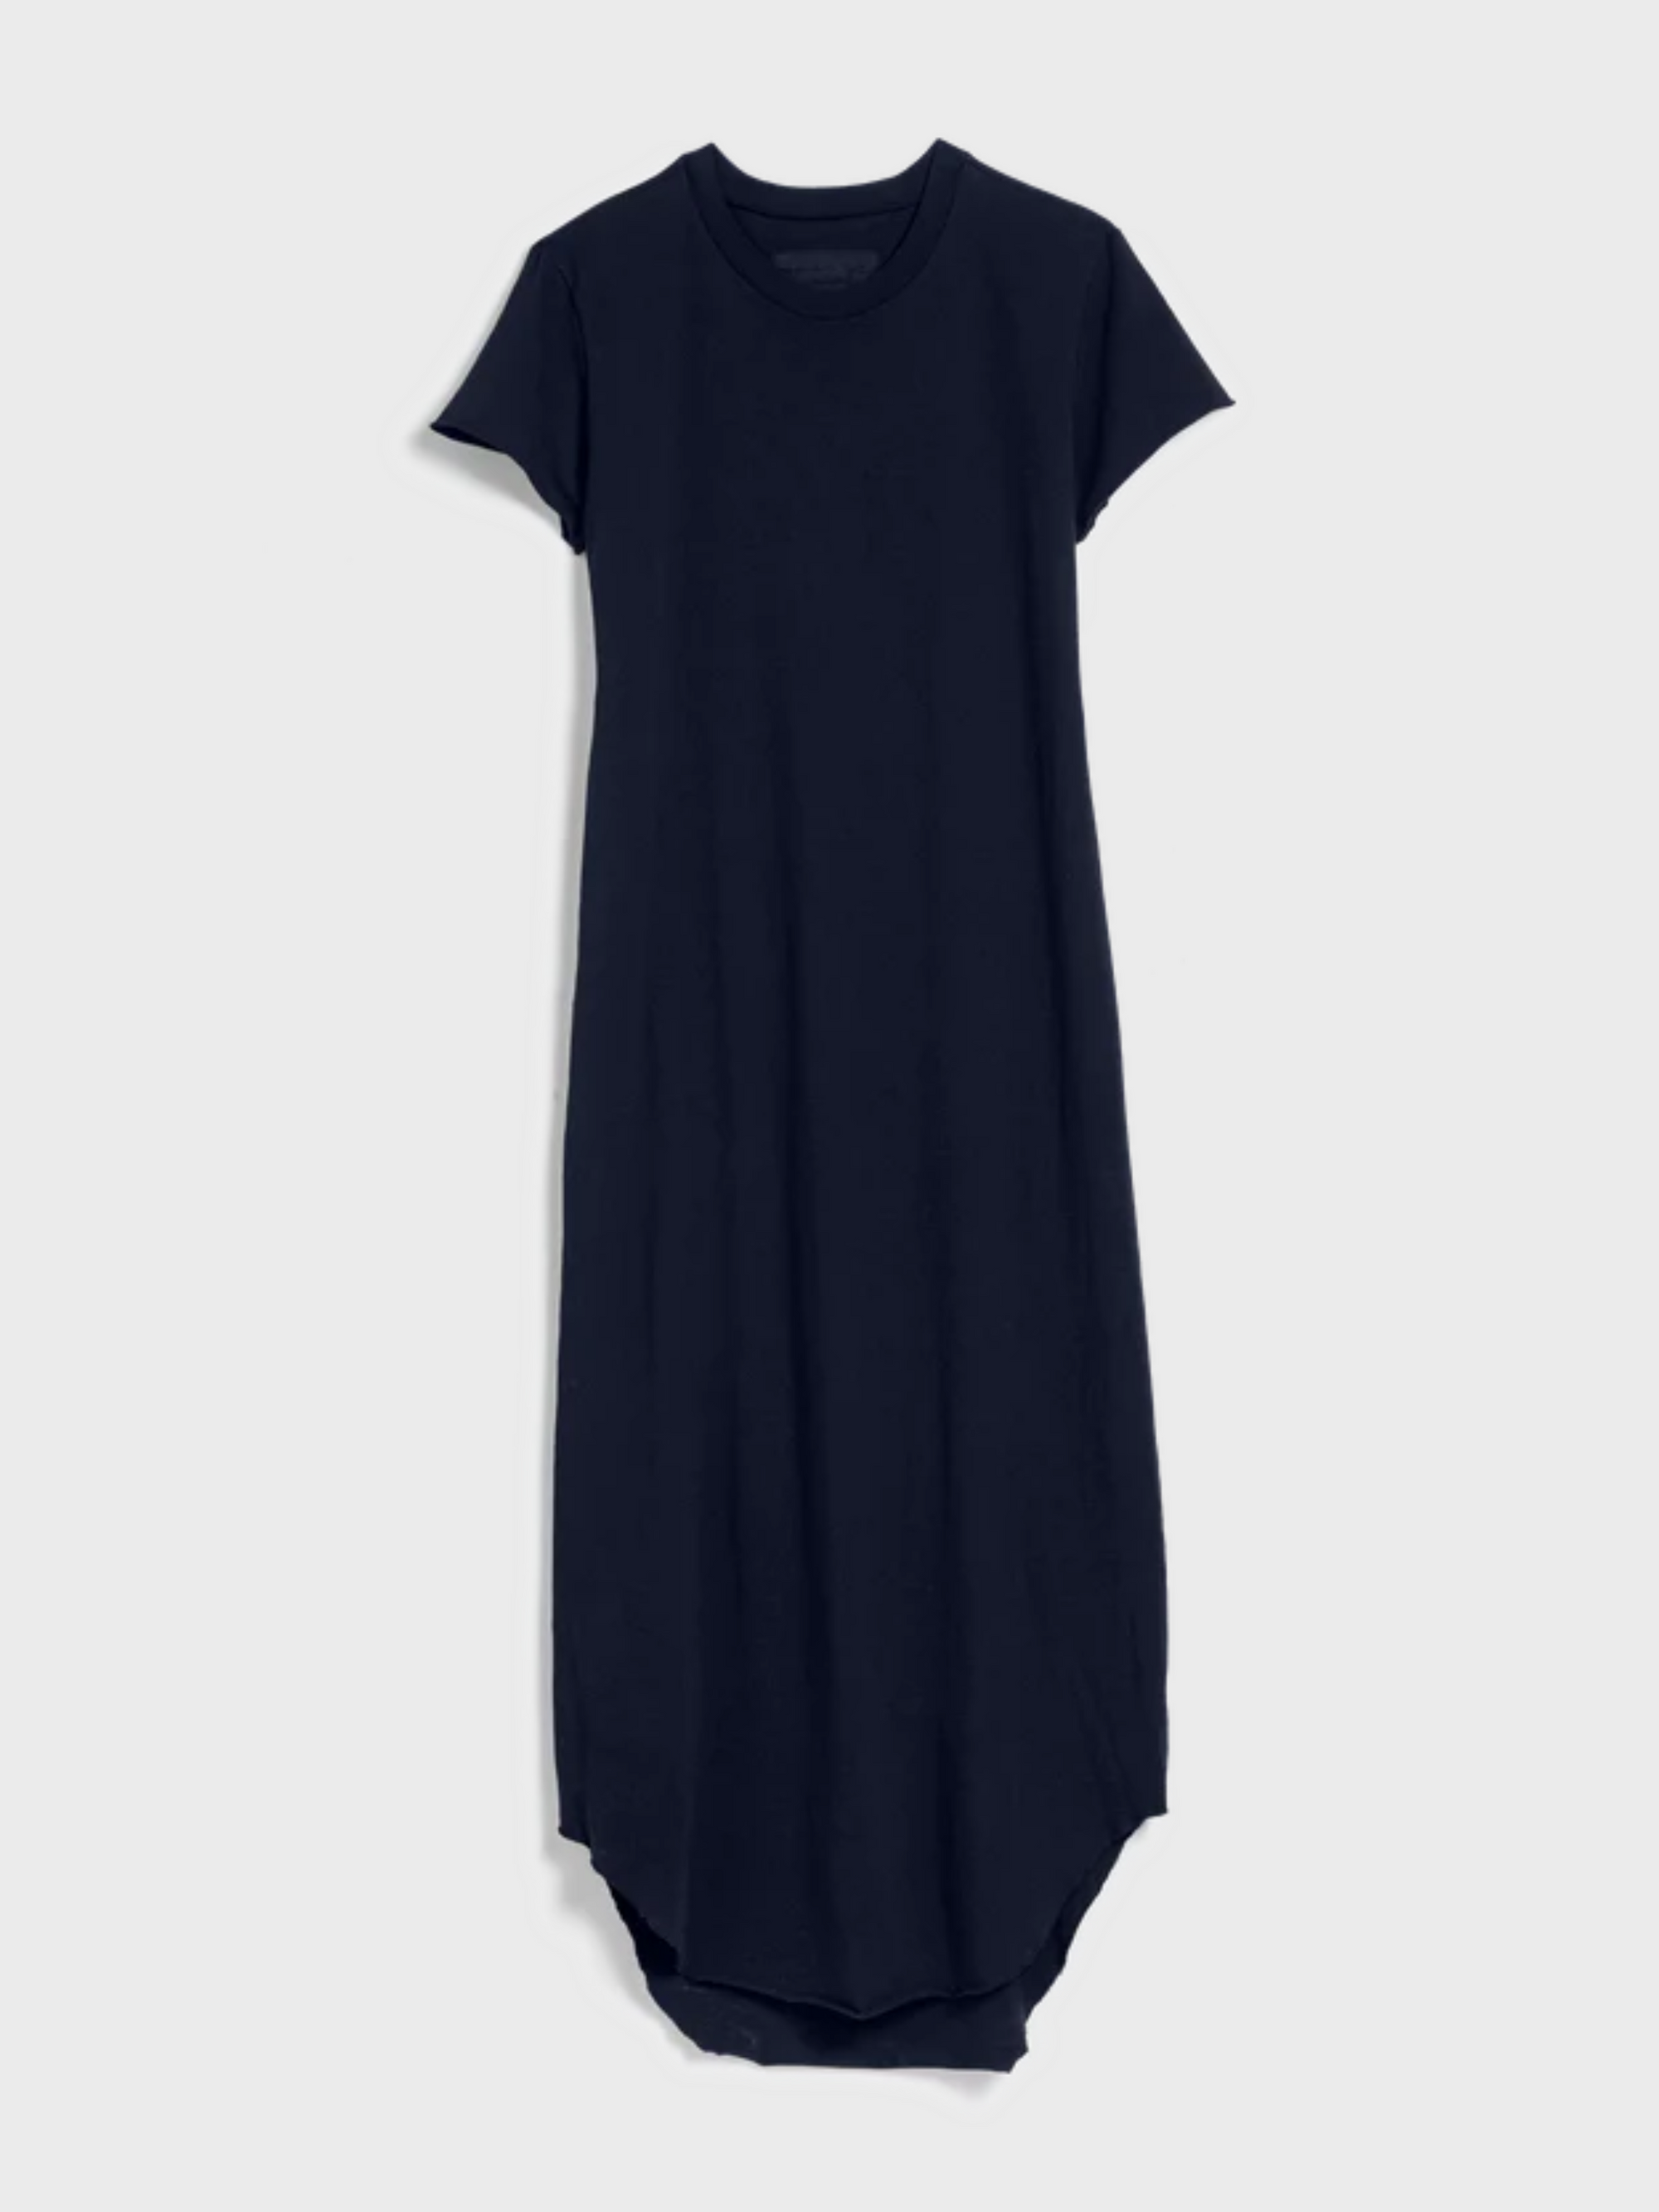 Frank &amp; Eileen Harper Perfect Tee Dress- British Royal Navy-Dresses-West of Woodward Boutique-Vancouver-Canada